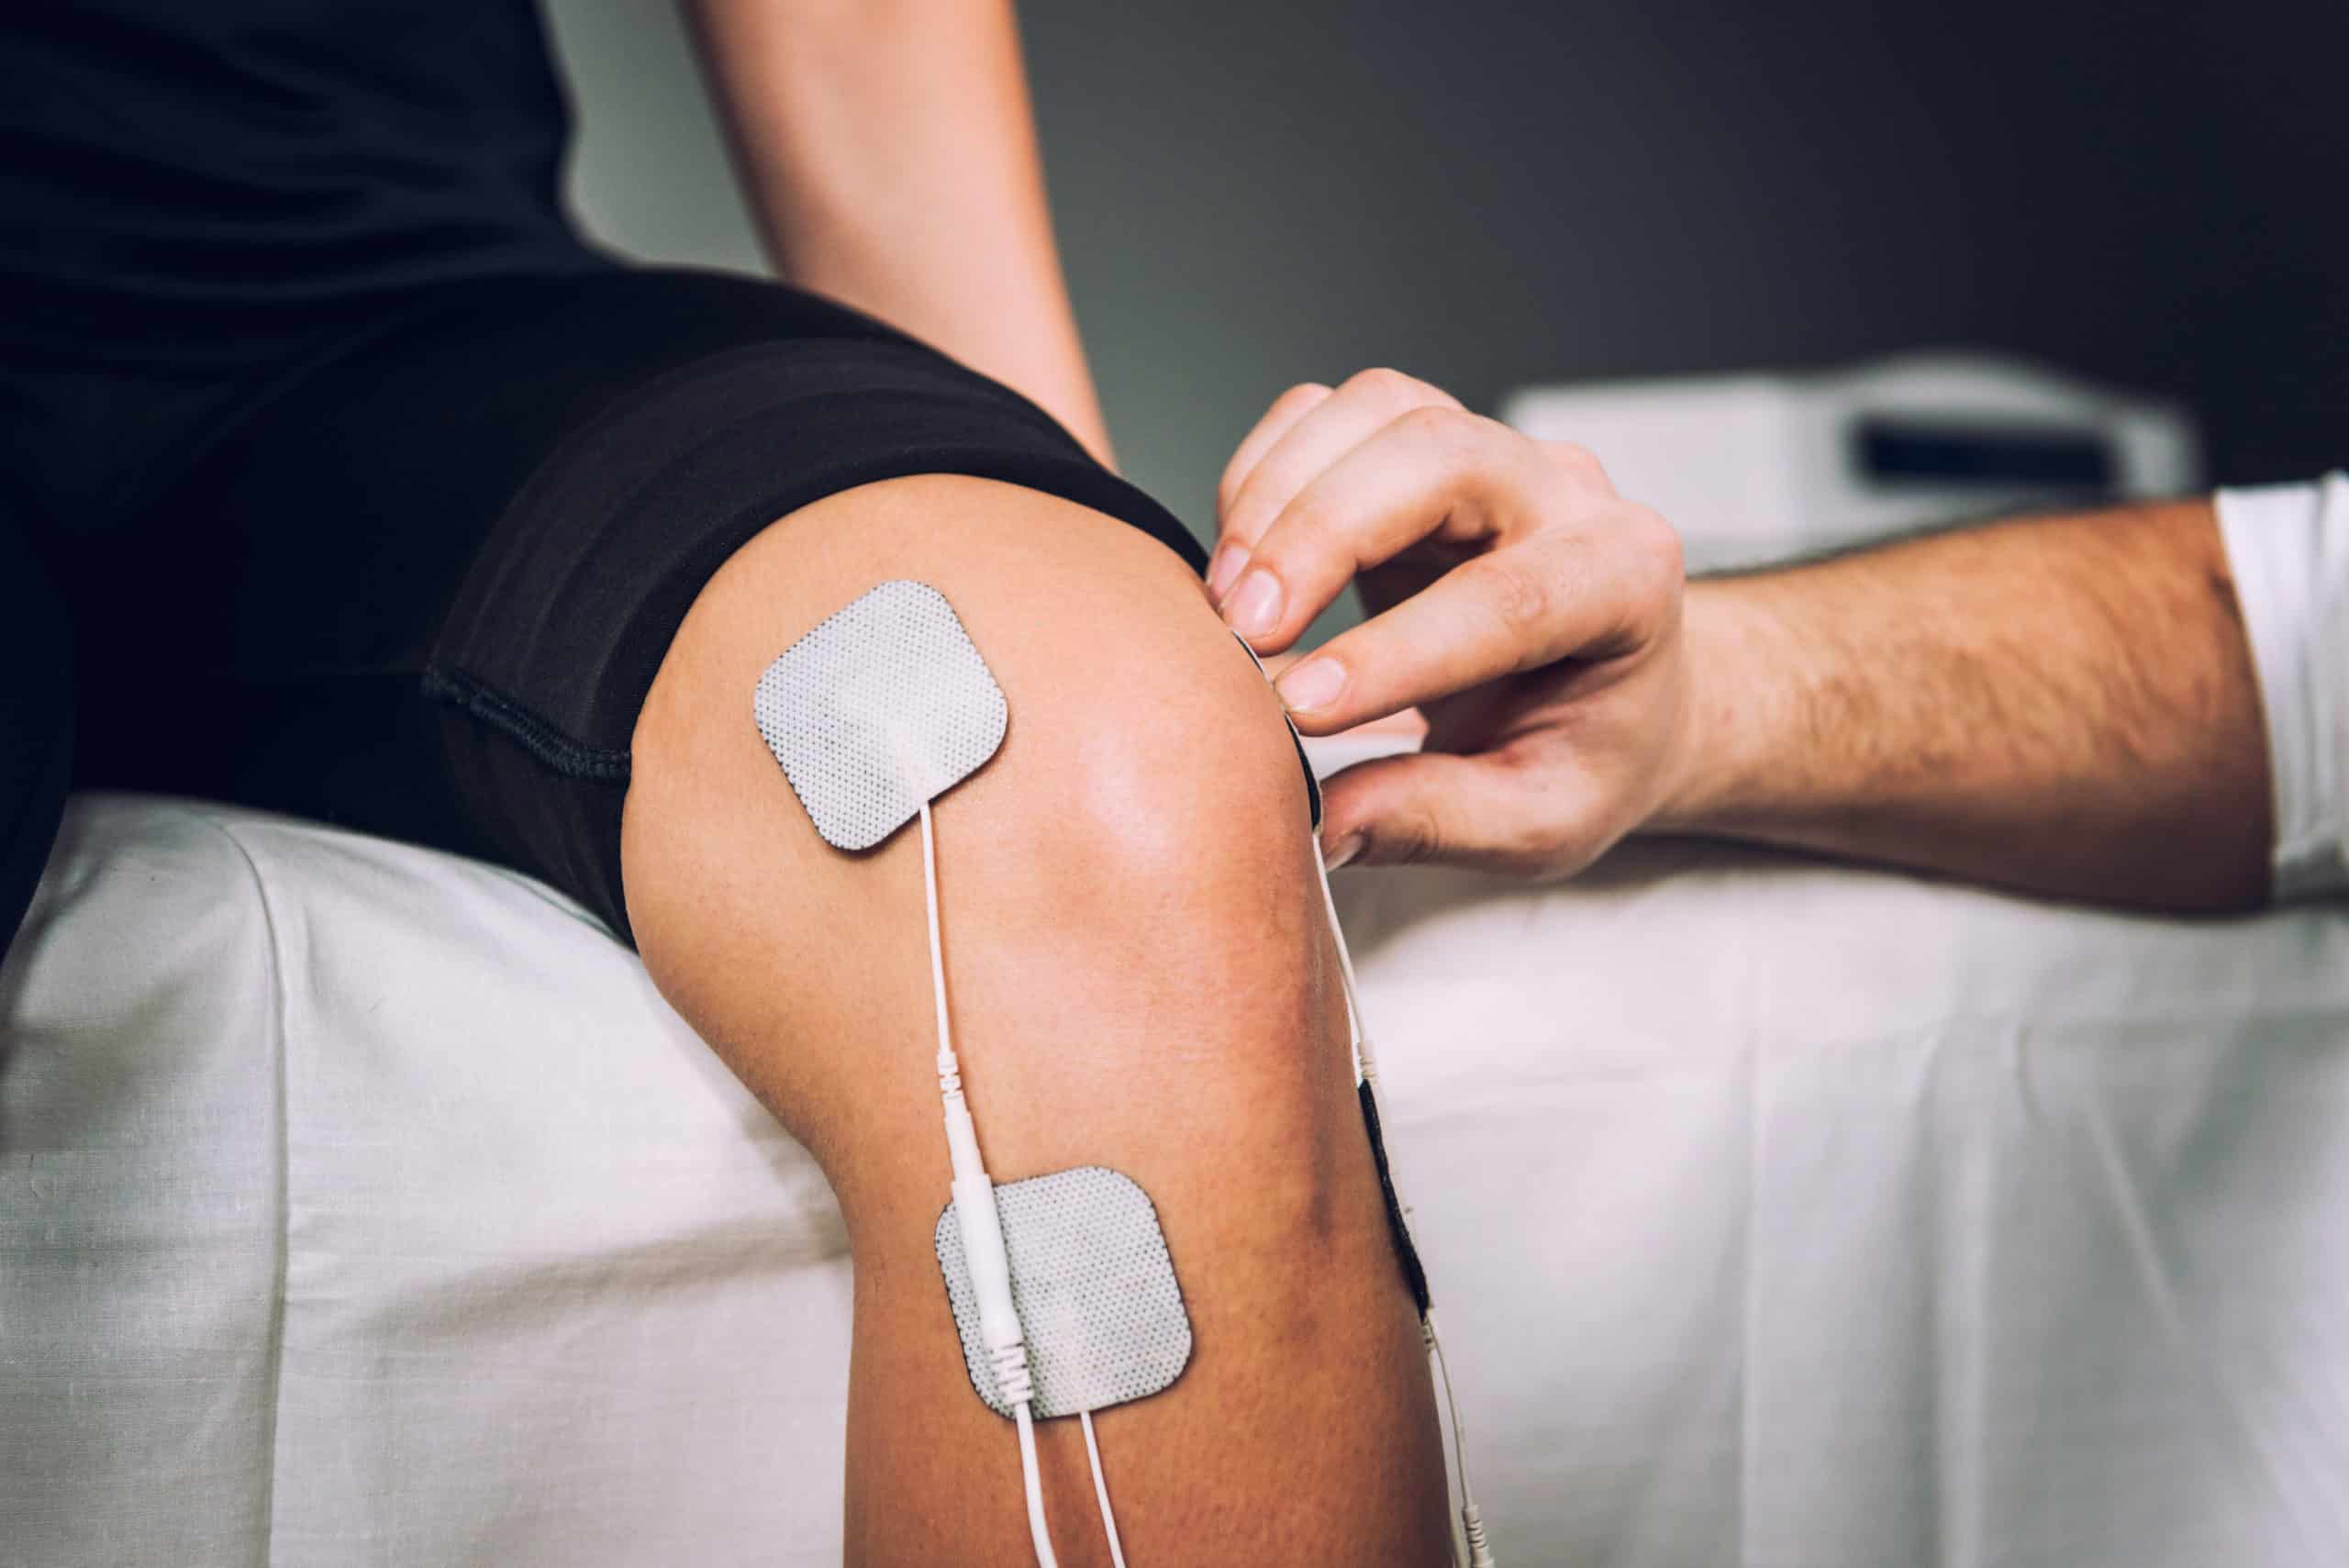 Transcutaneous Electrical Stimulation (TENS) for Chronic Lumbar Spine Pain  